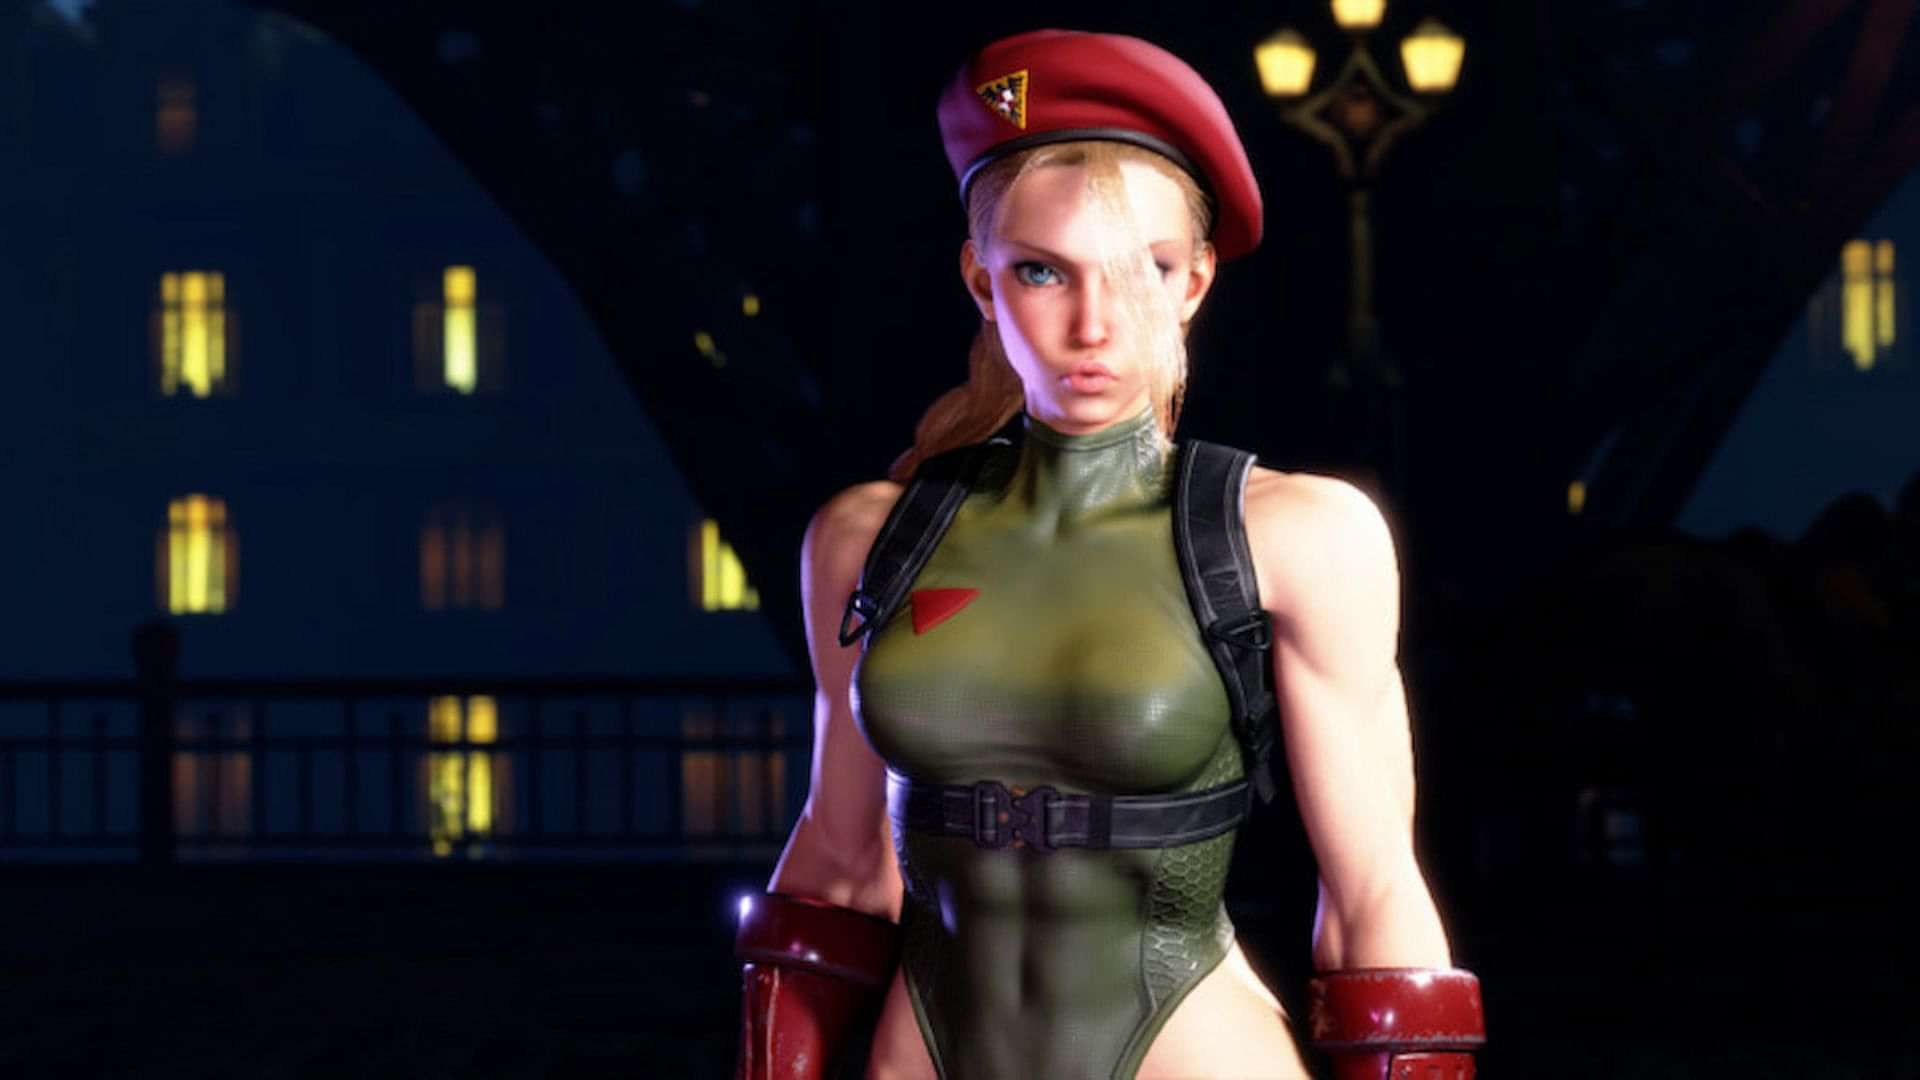 Street Fighter 6: How to equip Cammy's alternate costume - The SportsRush